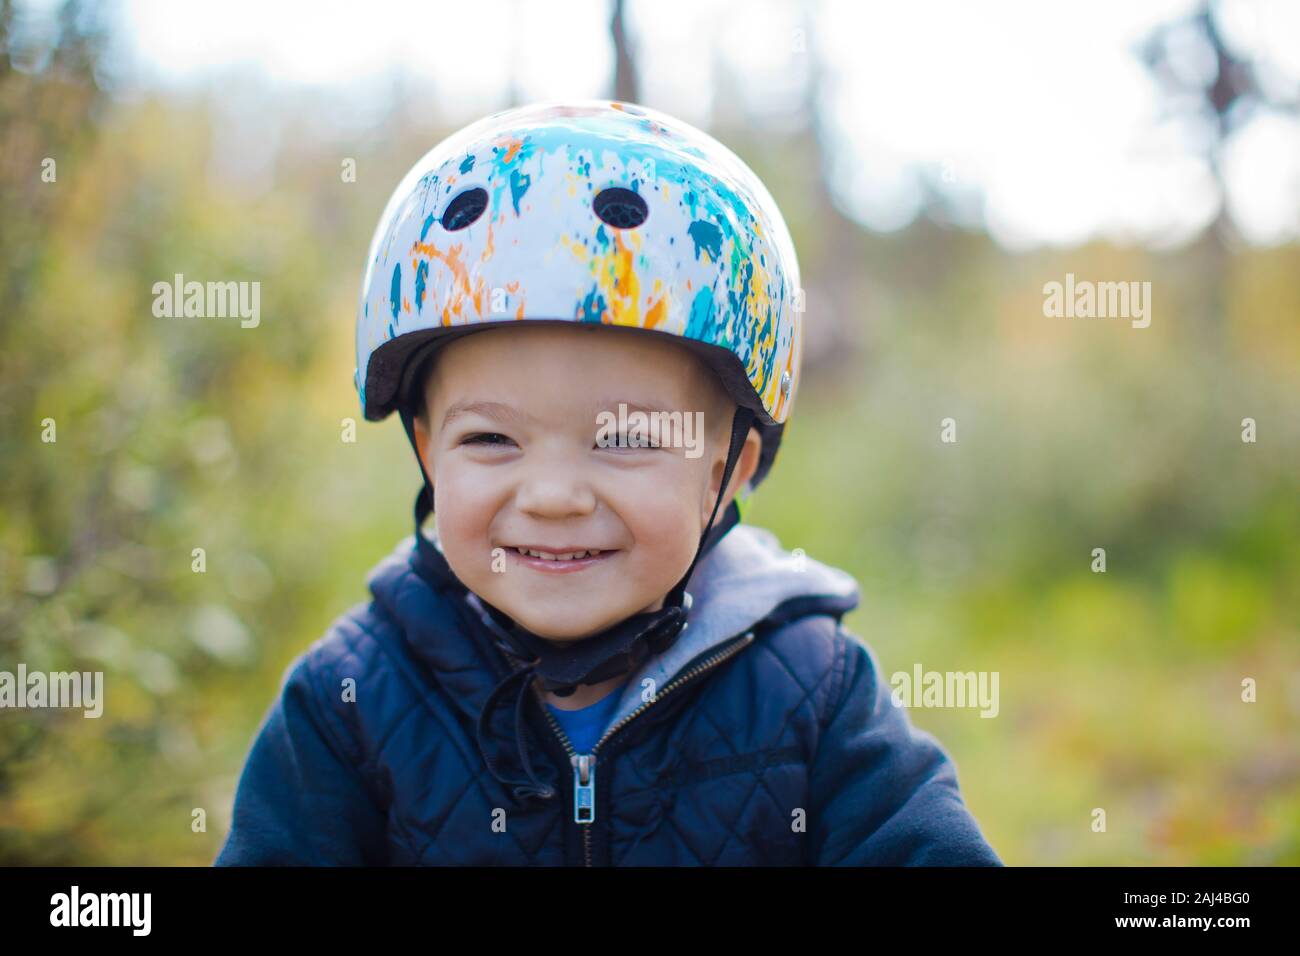 Portrait of young boy with bike helmet on. Stock Photo